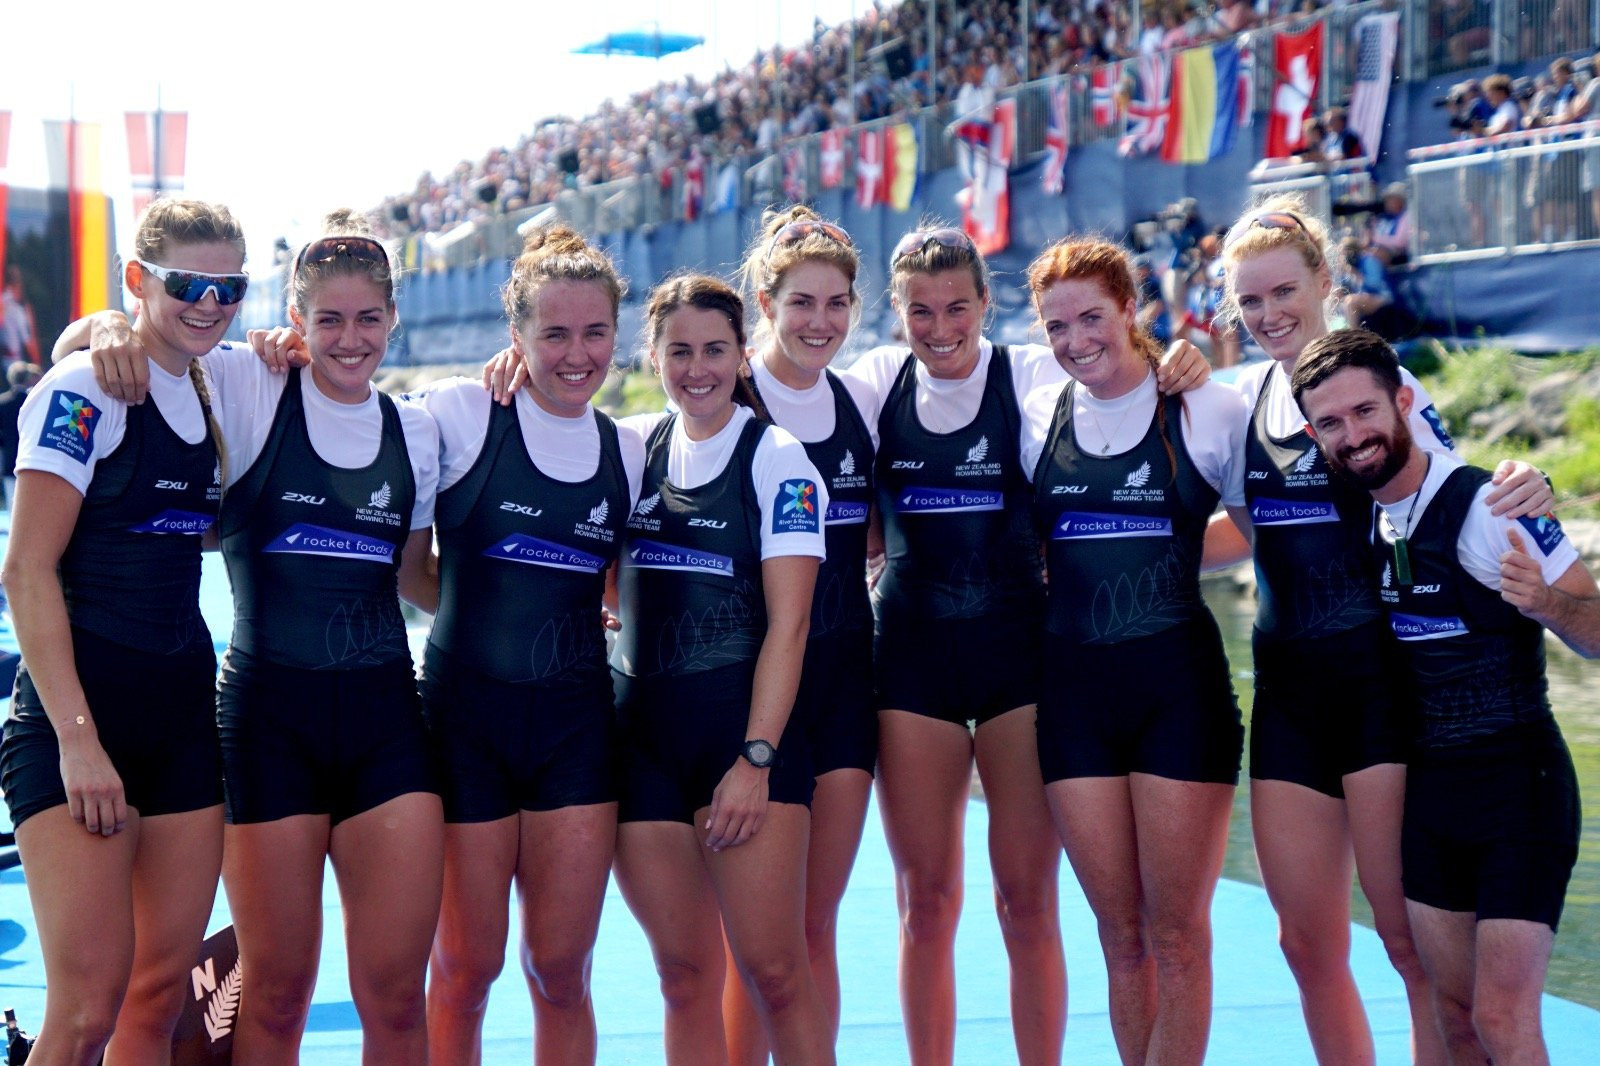 New Zealand claimed victory in the women's eight on the last day of the World Rowing Championships in Austria ©World Rowing